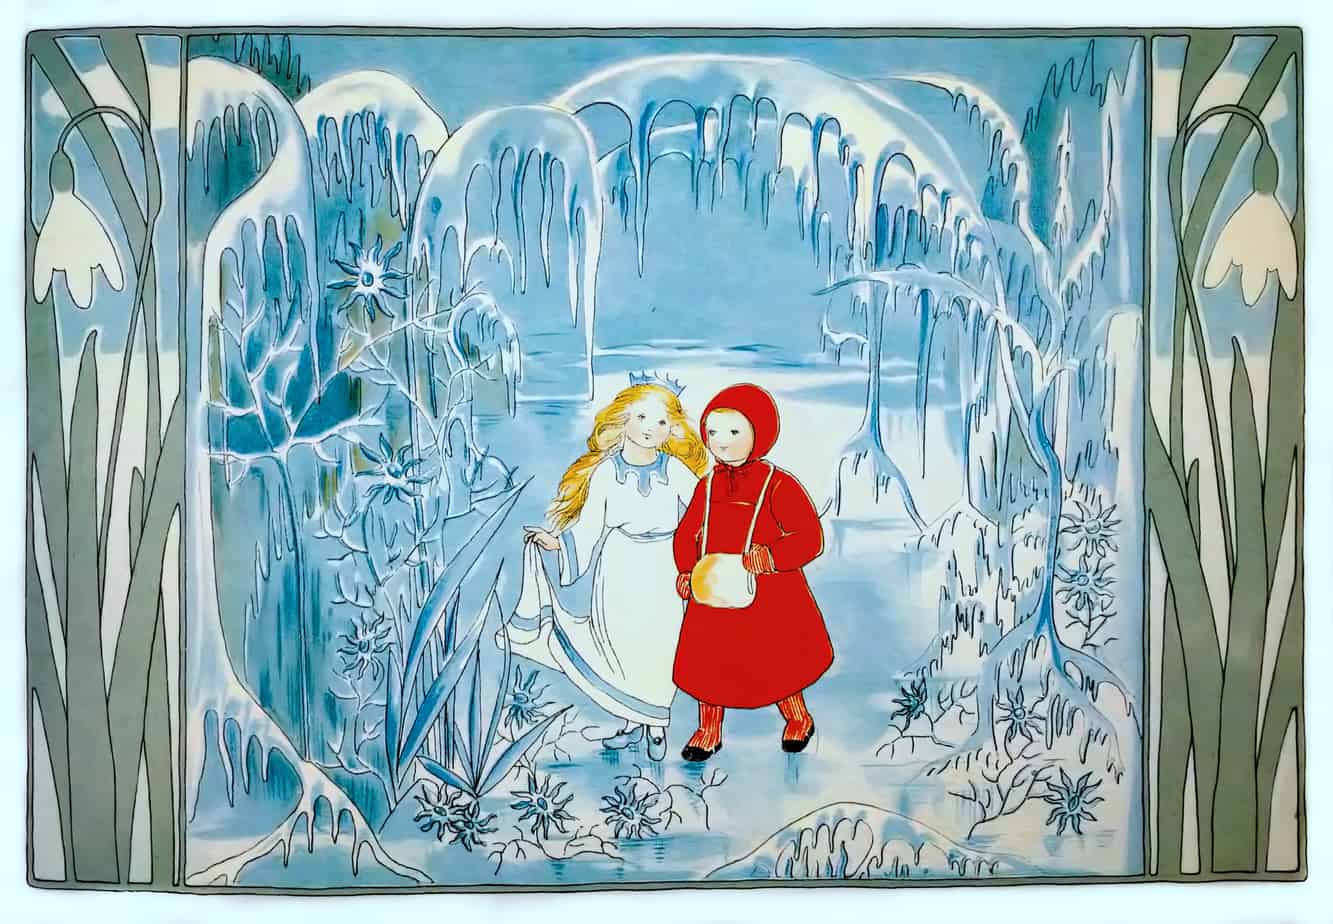 by Sybille von Olfers for The Story of the Snow Children (1906). (At first glance it may appear the kid is wearing a toilet roll. I believe it is a hand warmer.)